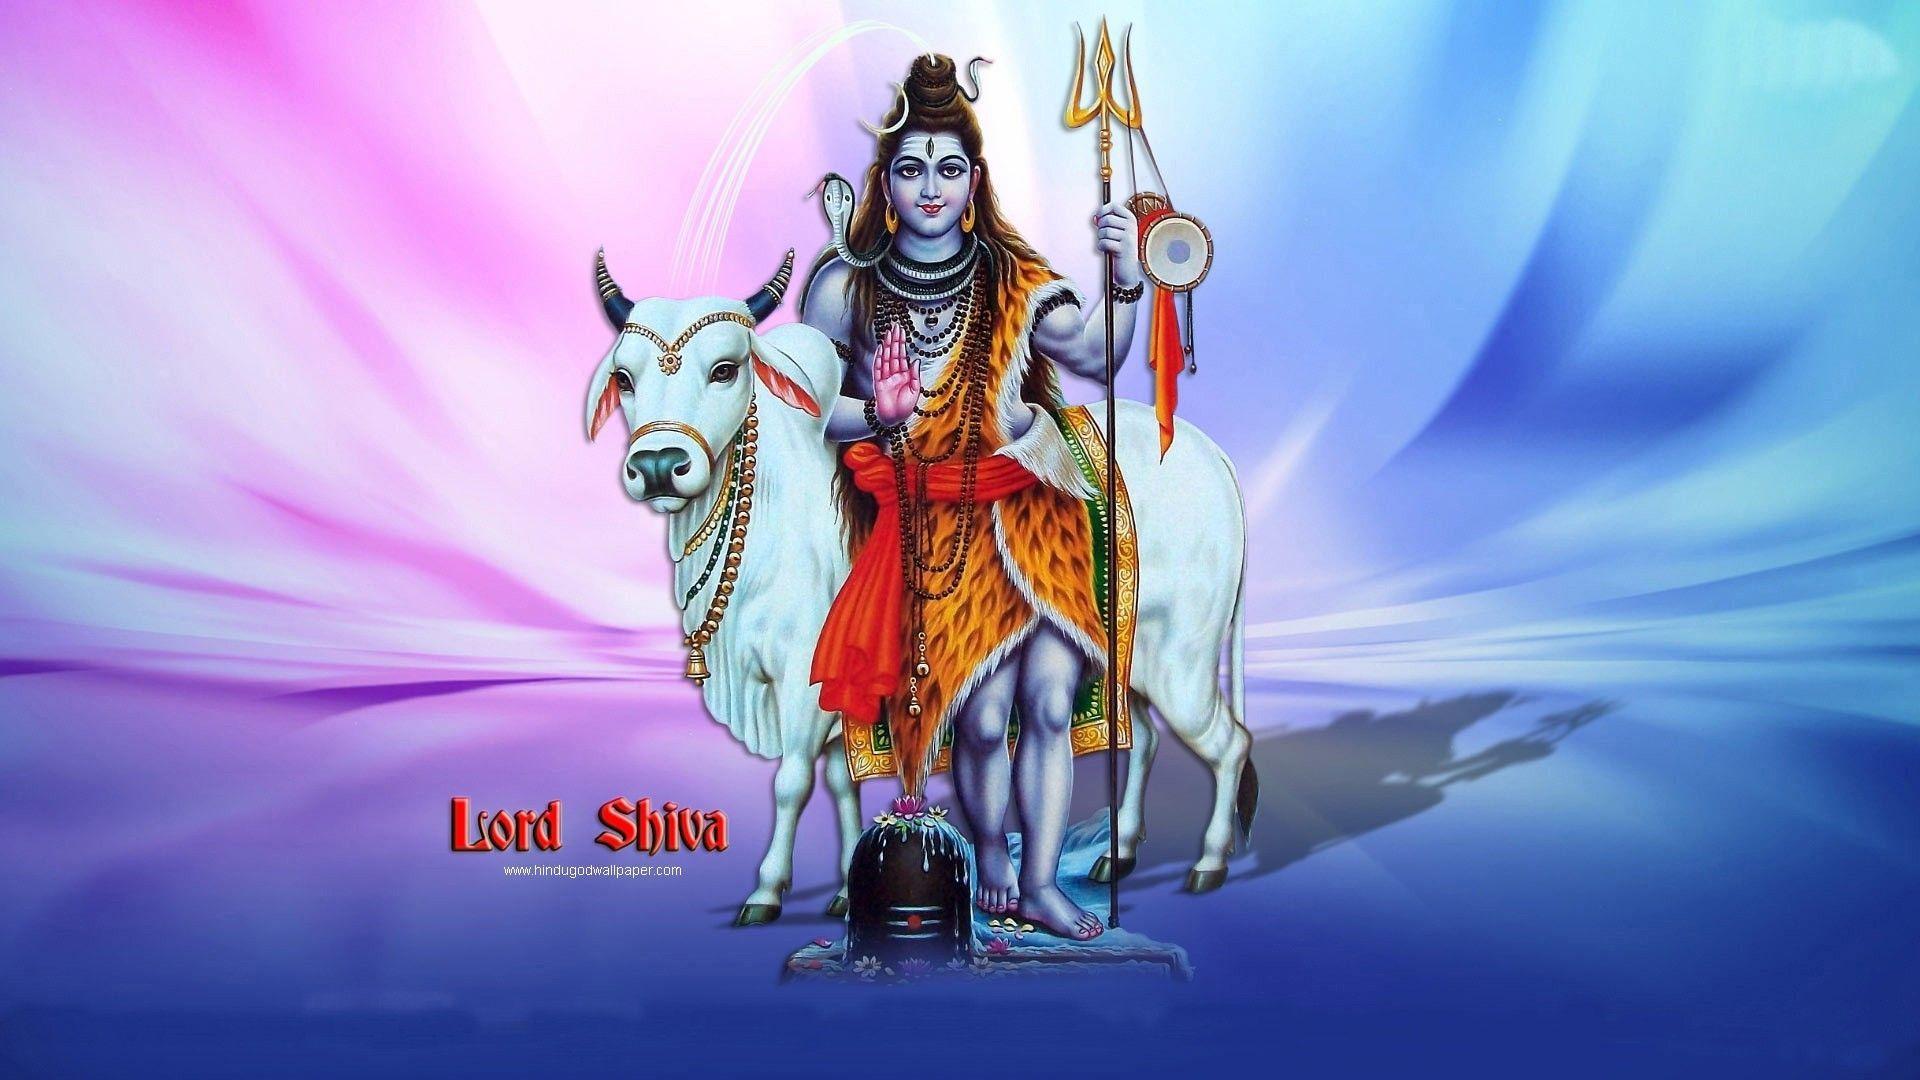 SHIVA HD WALLPAPERS, 1080P PICTURES, IMAGES HD. Shiva